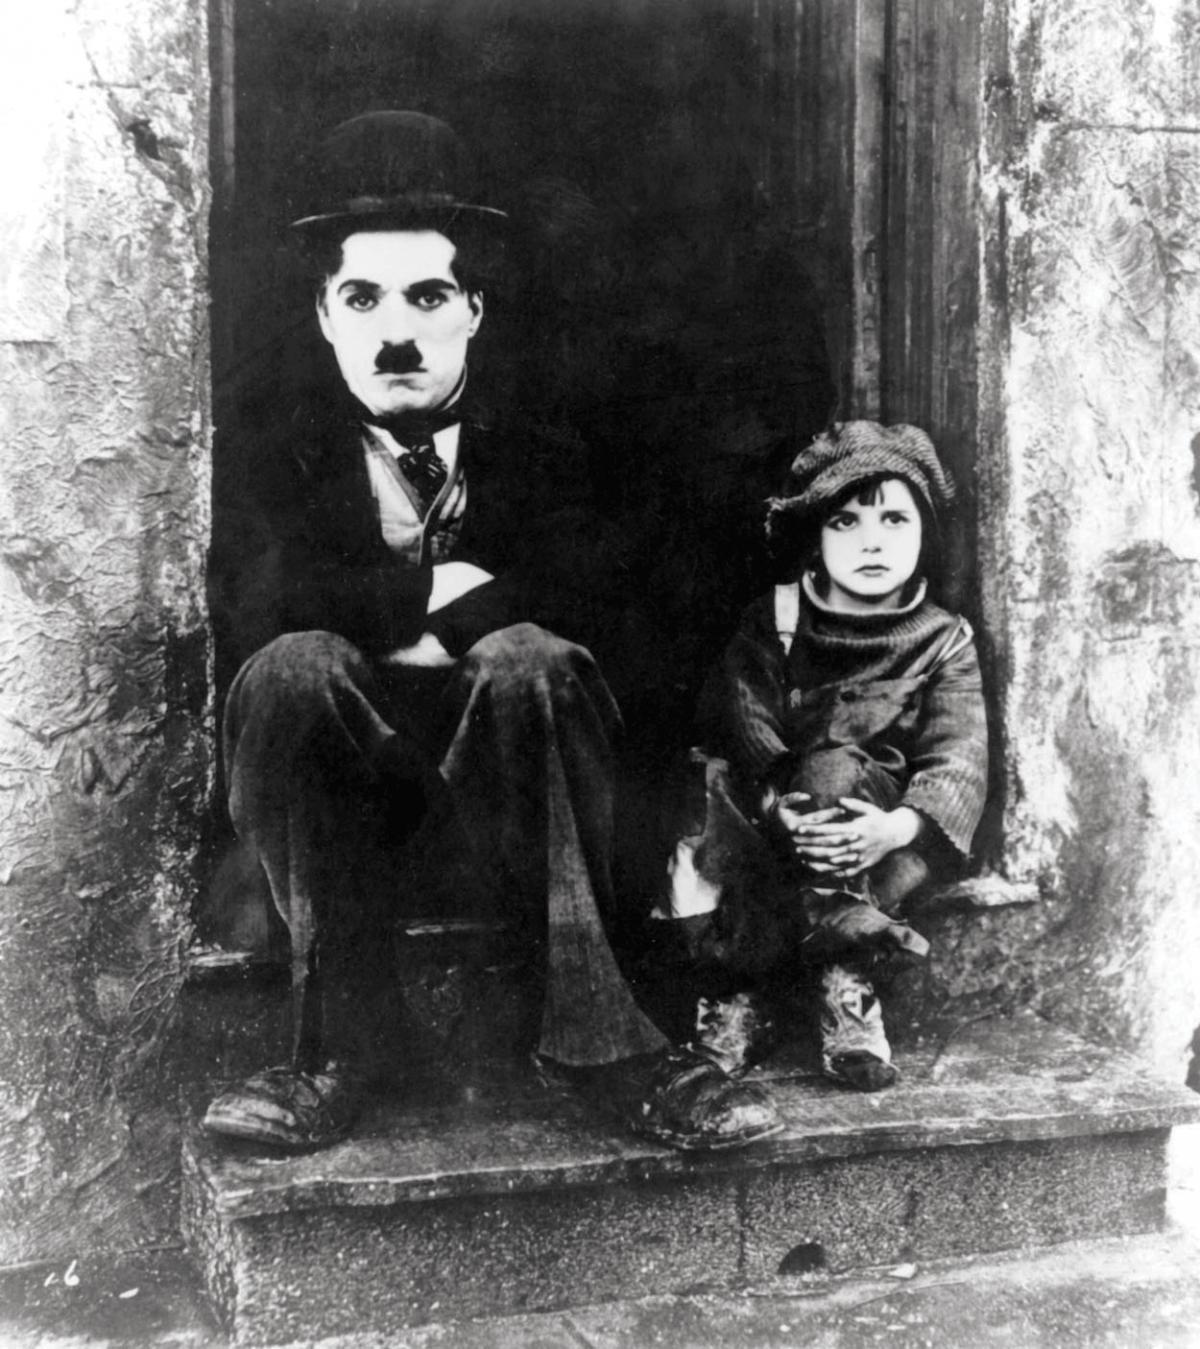 Black and white still of Charlie Chaplin and Jackie Coogan sitting on stoop